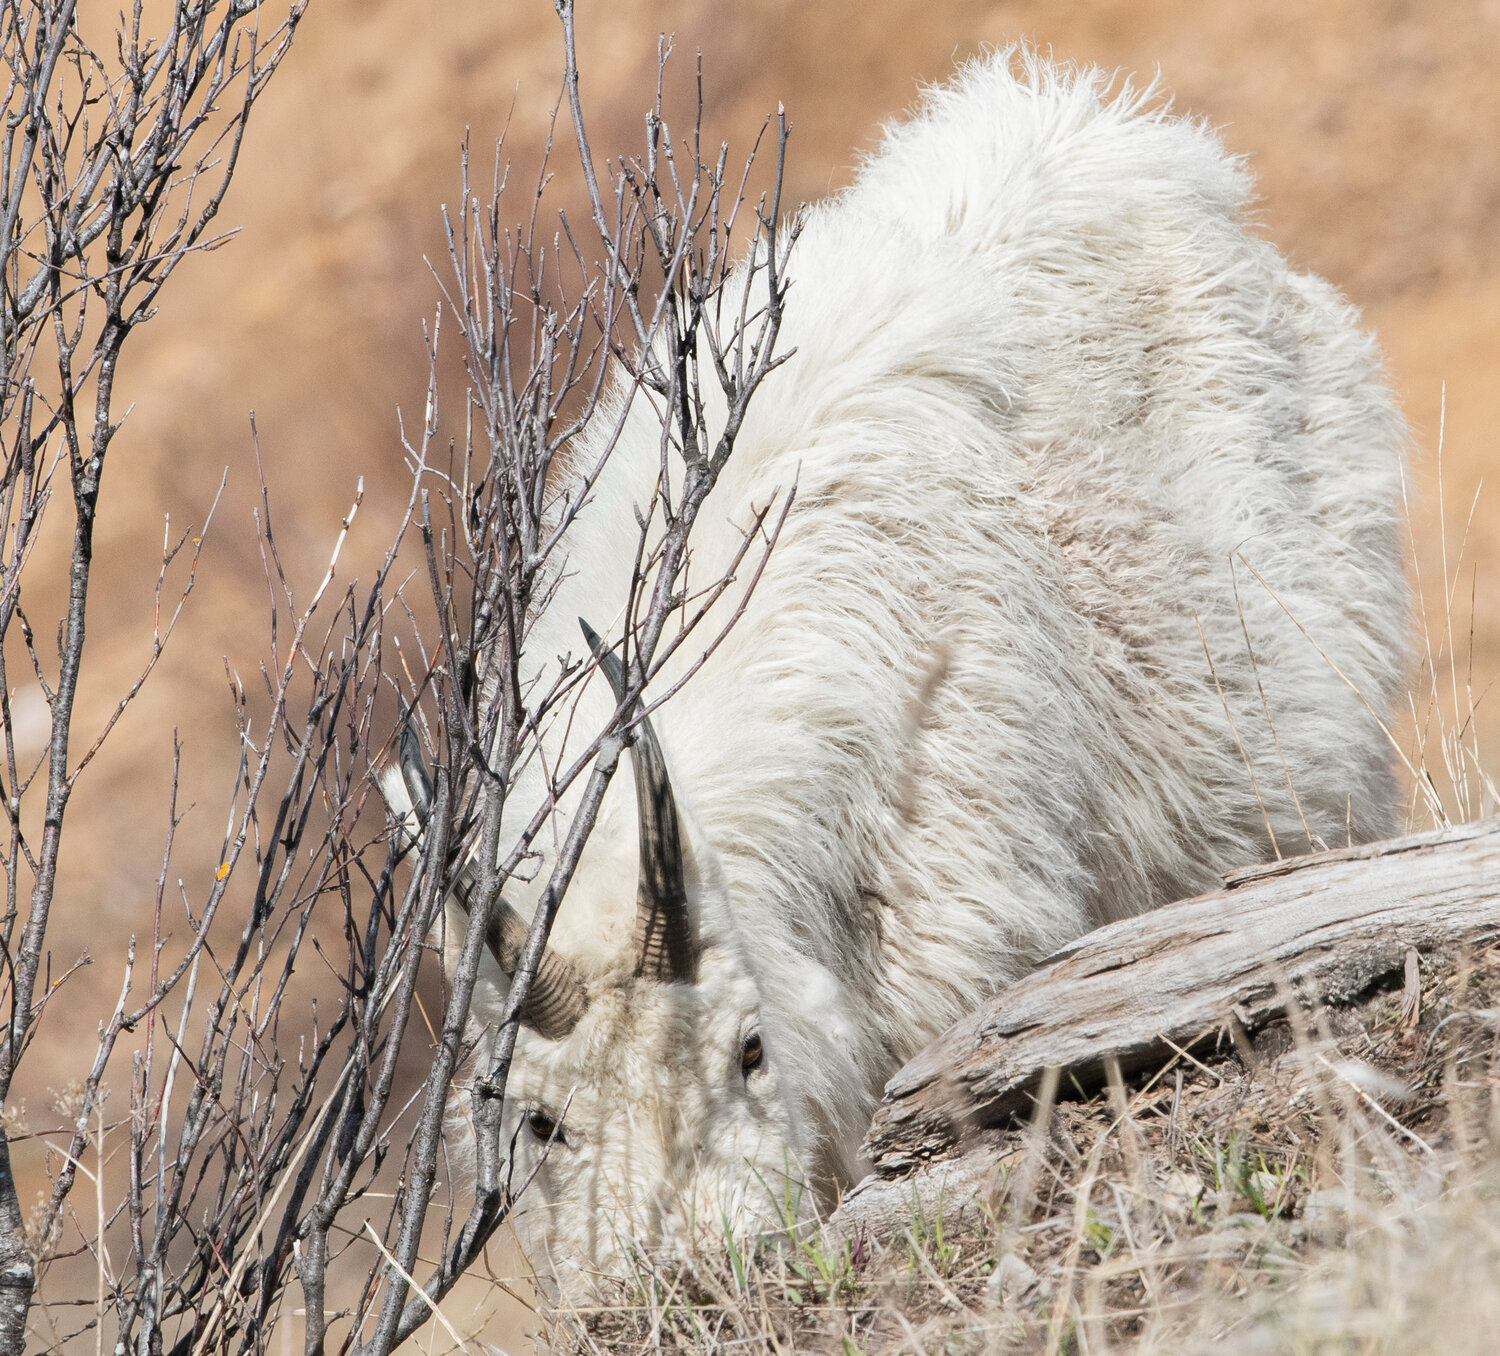 A goat gets down in the dirt to graze for grass by Mount St. Helens near the Johnston Ridge Observatory on Thursday, May 11.